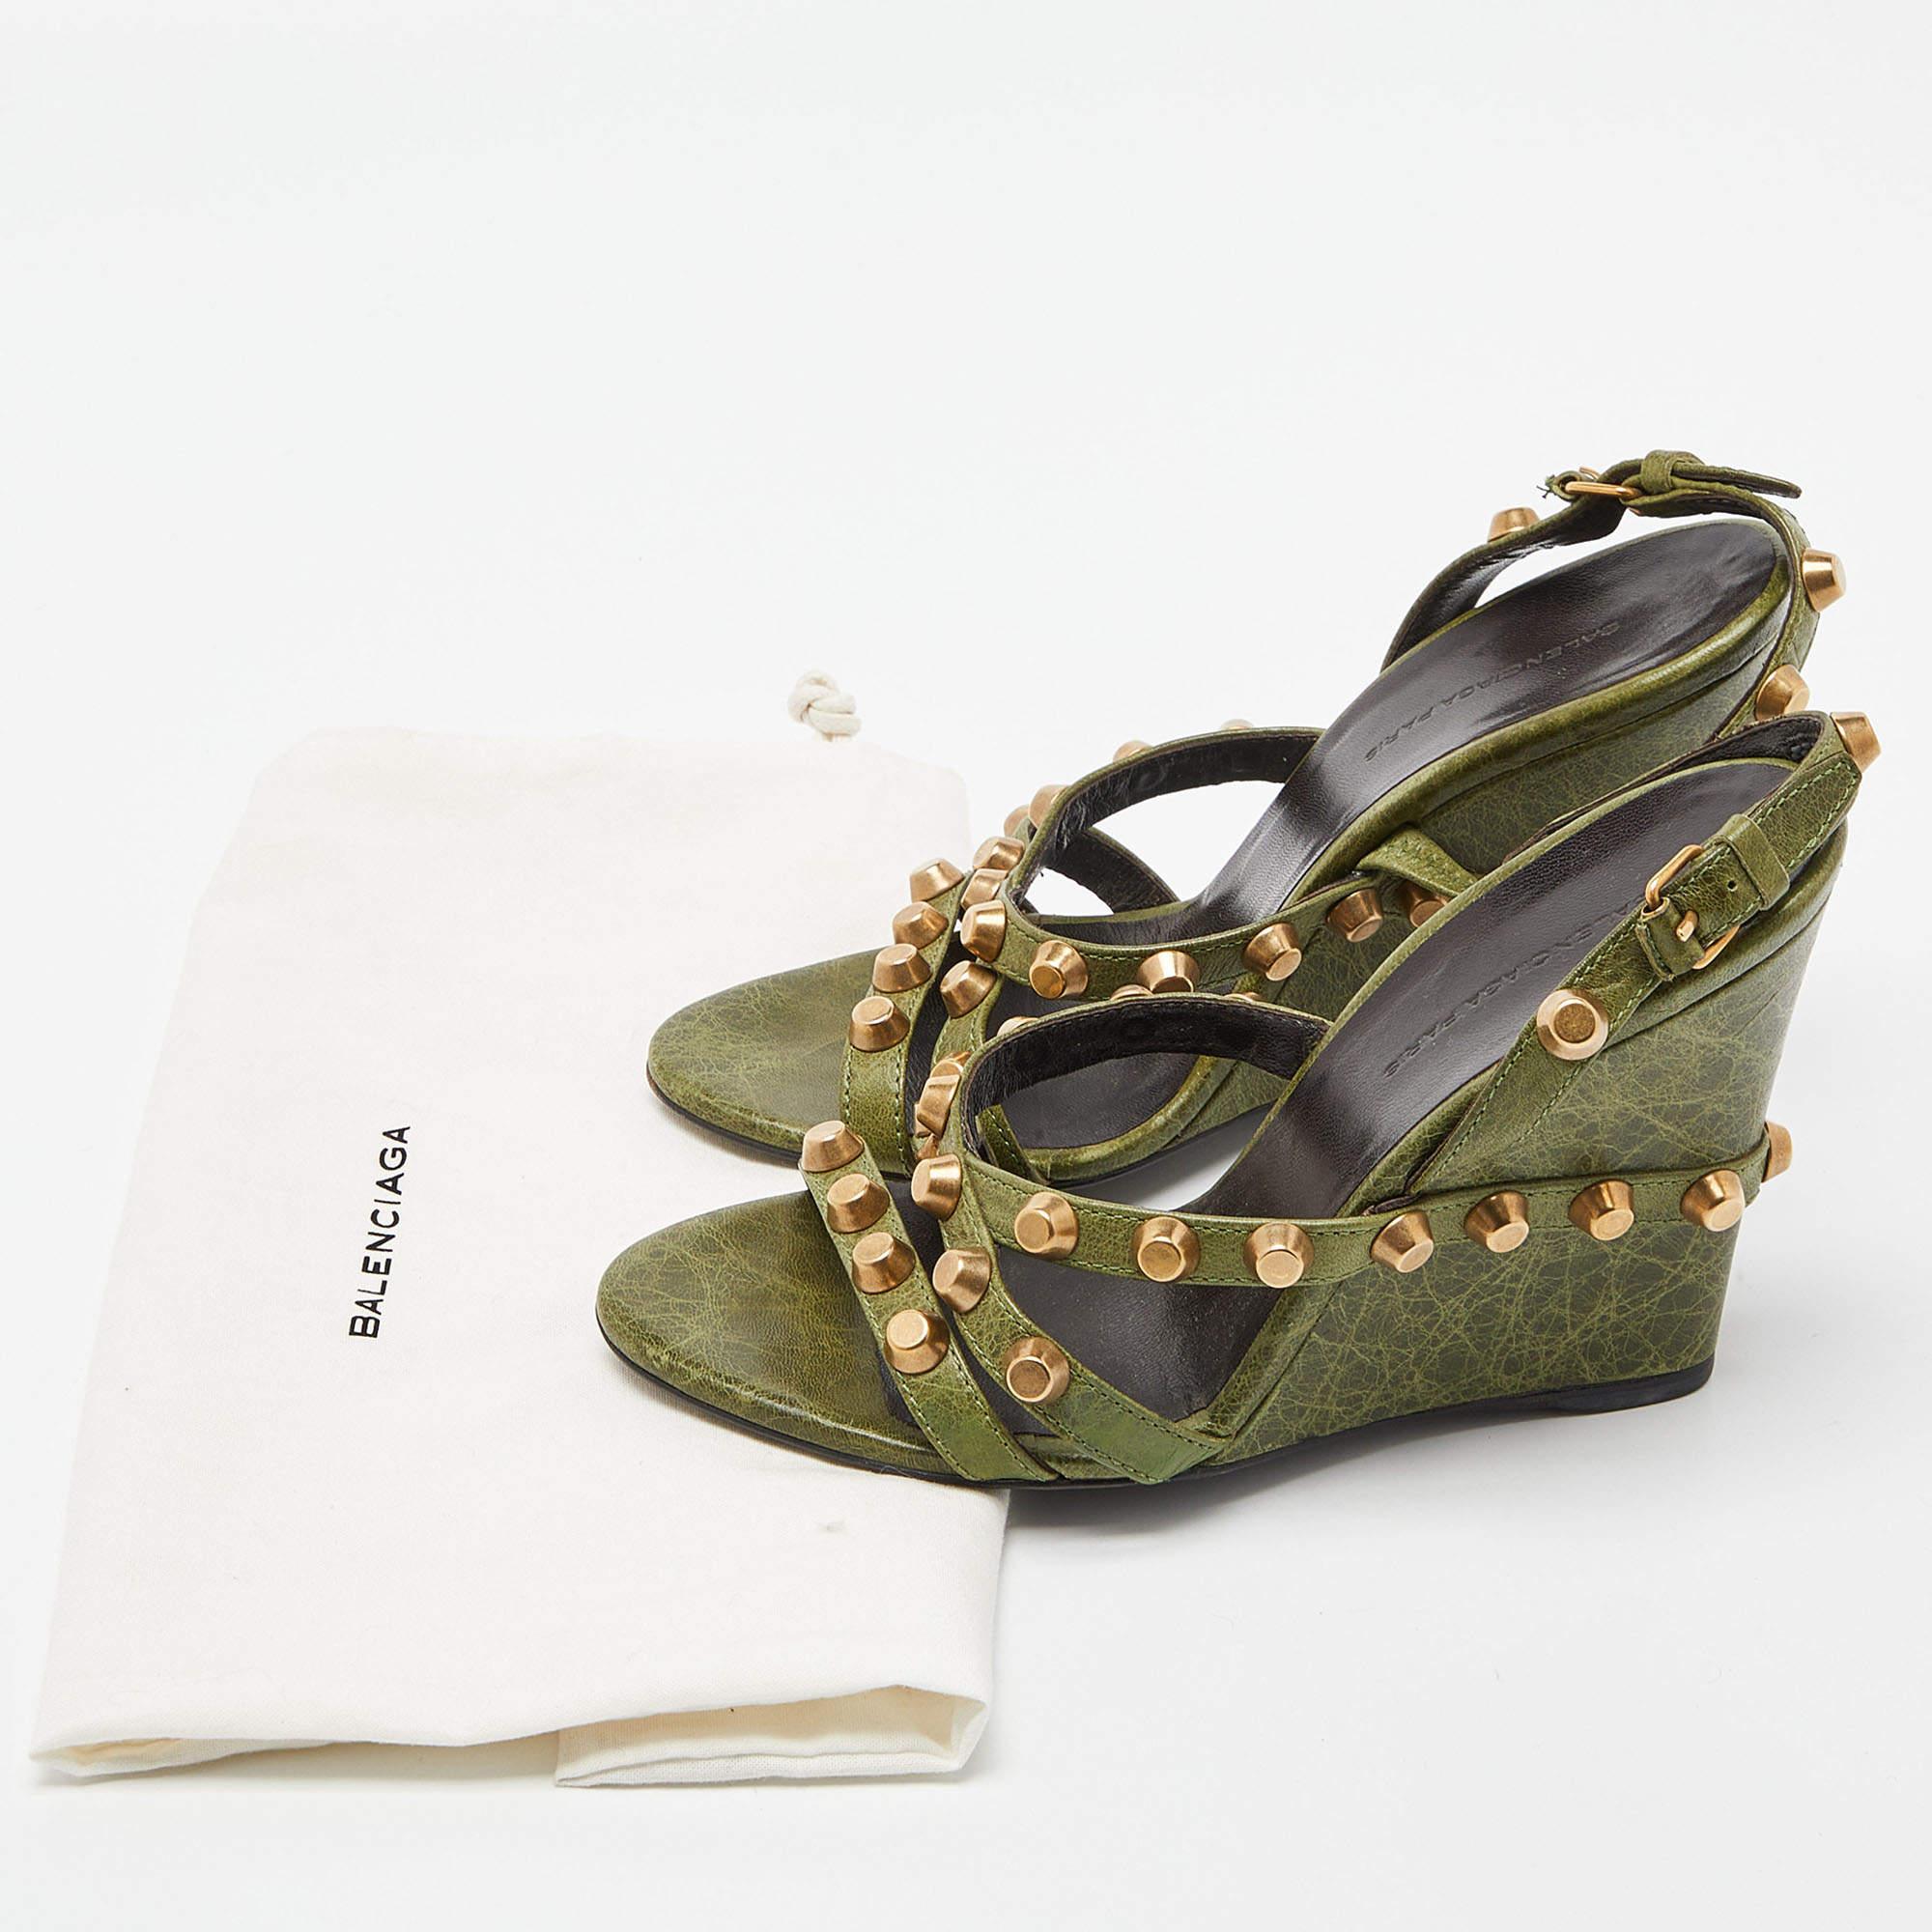 Balenciaga Green Leather Arena Studded Wedge Sandals Size 36.5 For Sale 4